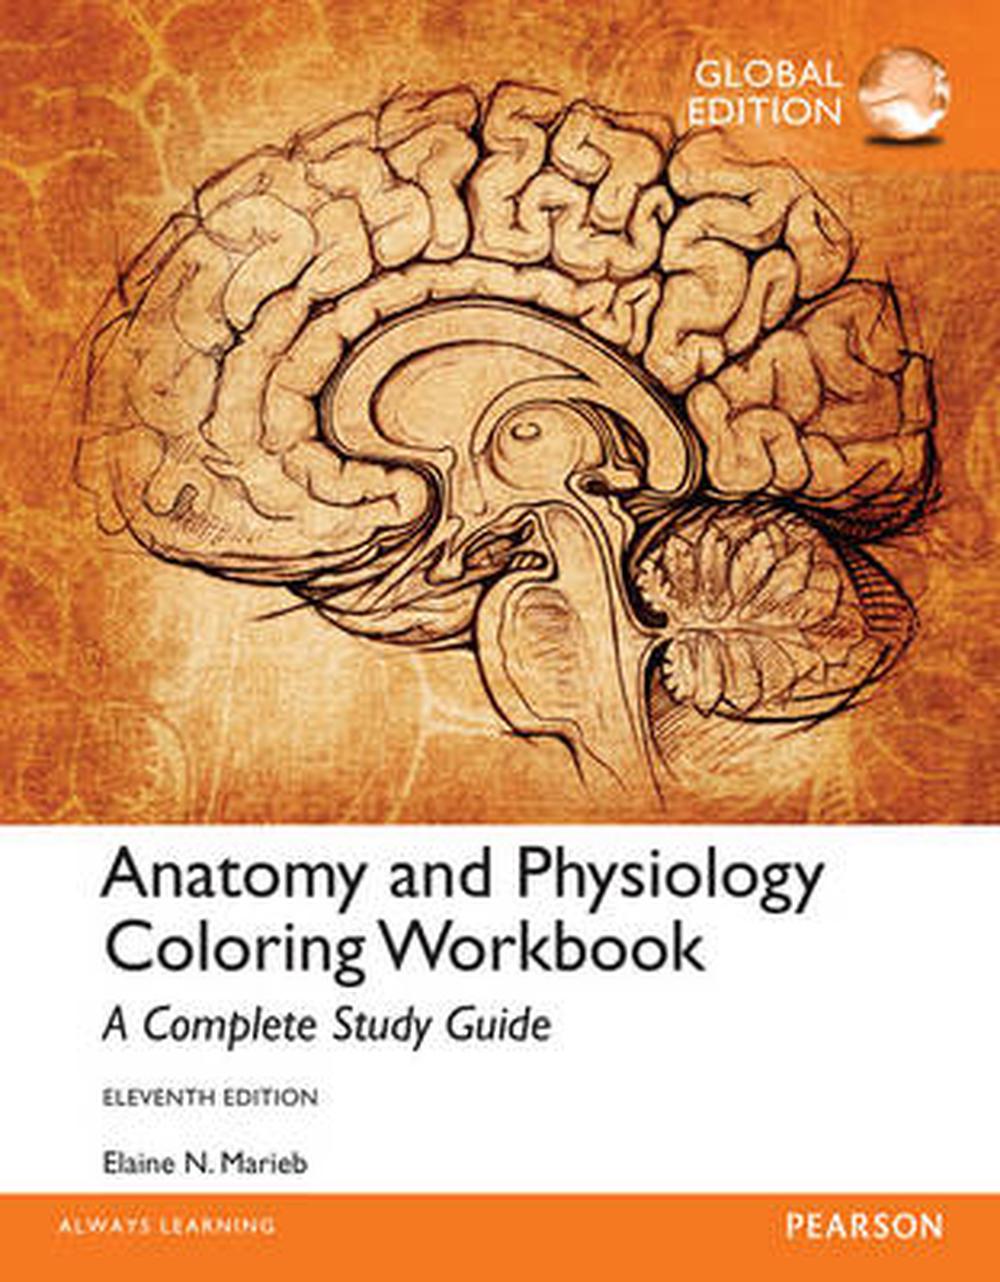 Anatomy and Physiology Coloring Workbook a Complete Study Guide